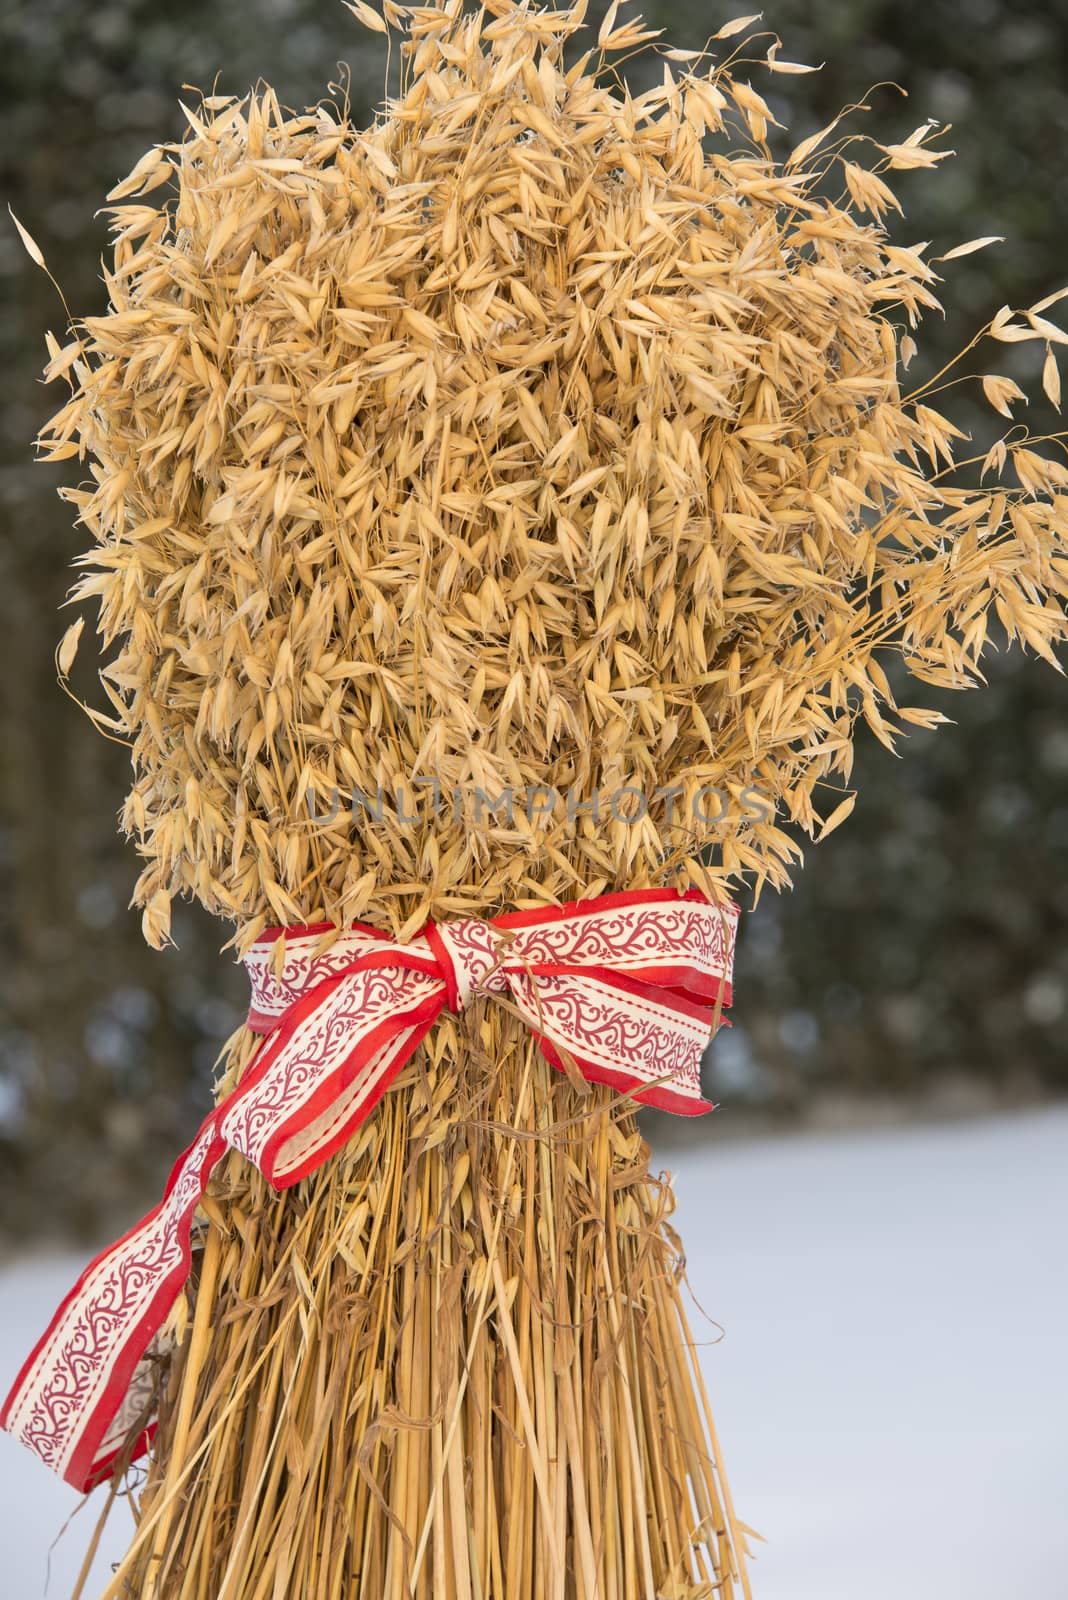 Sheaf of oats with a white and red ribbon in a garden.Vertical image